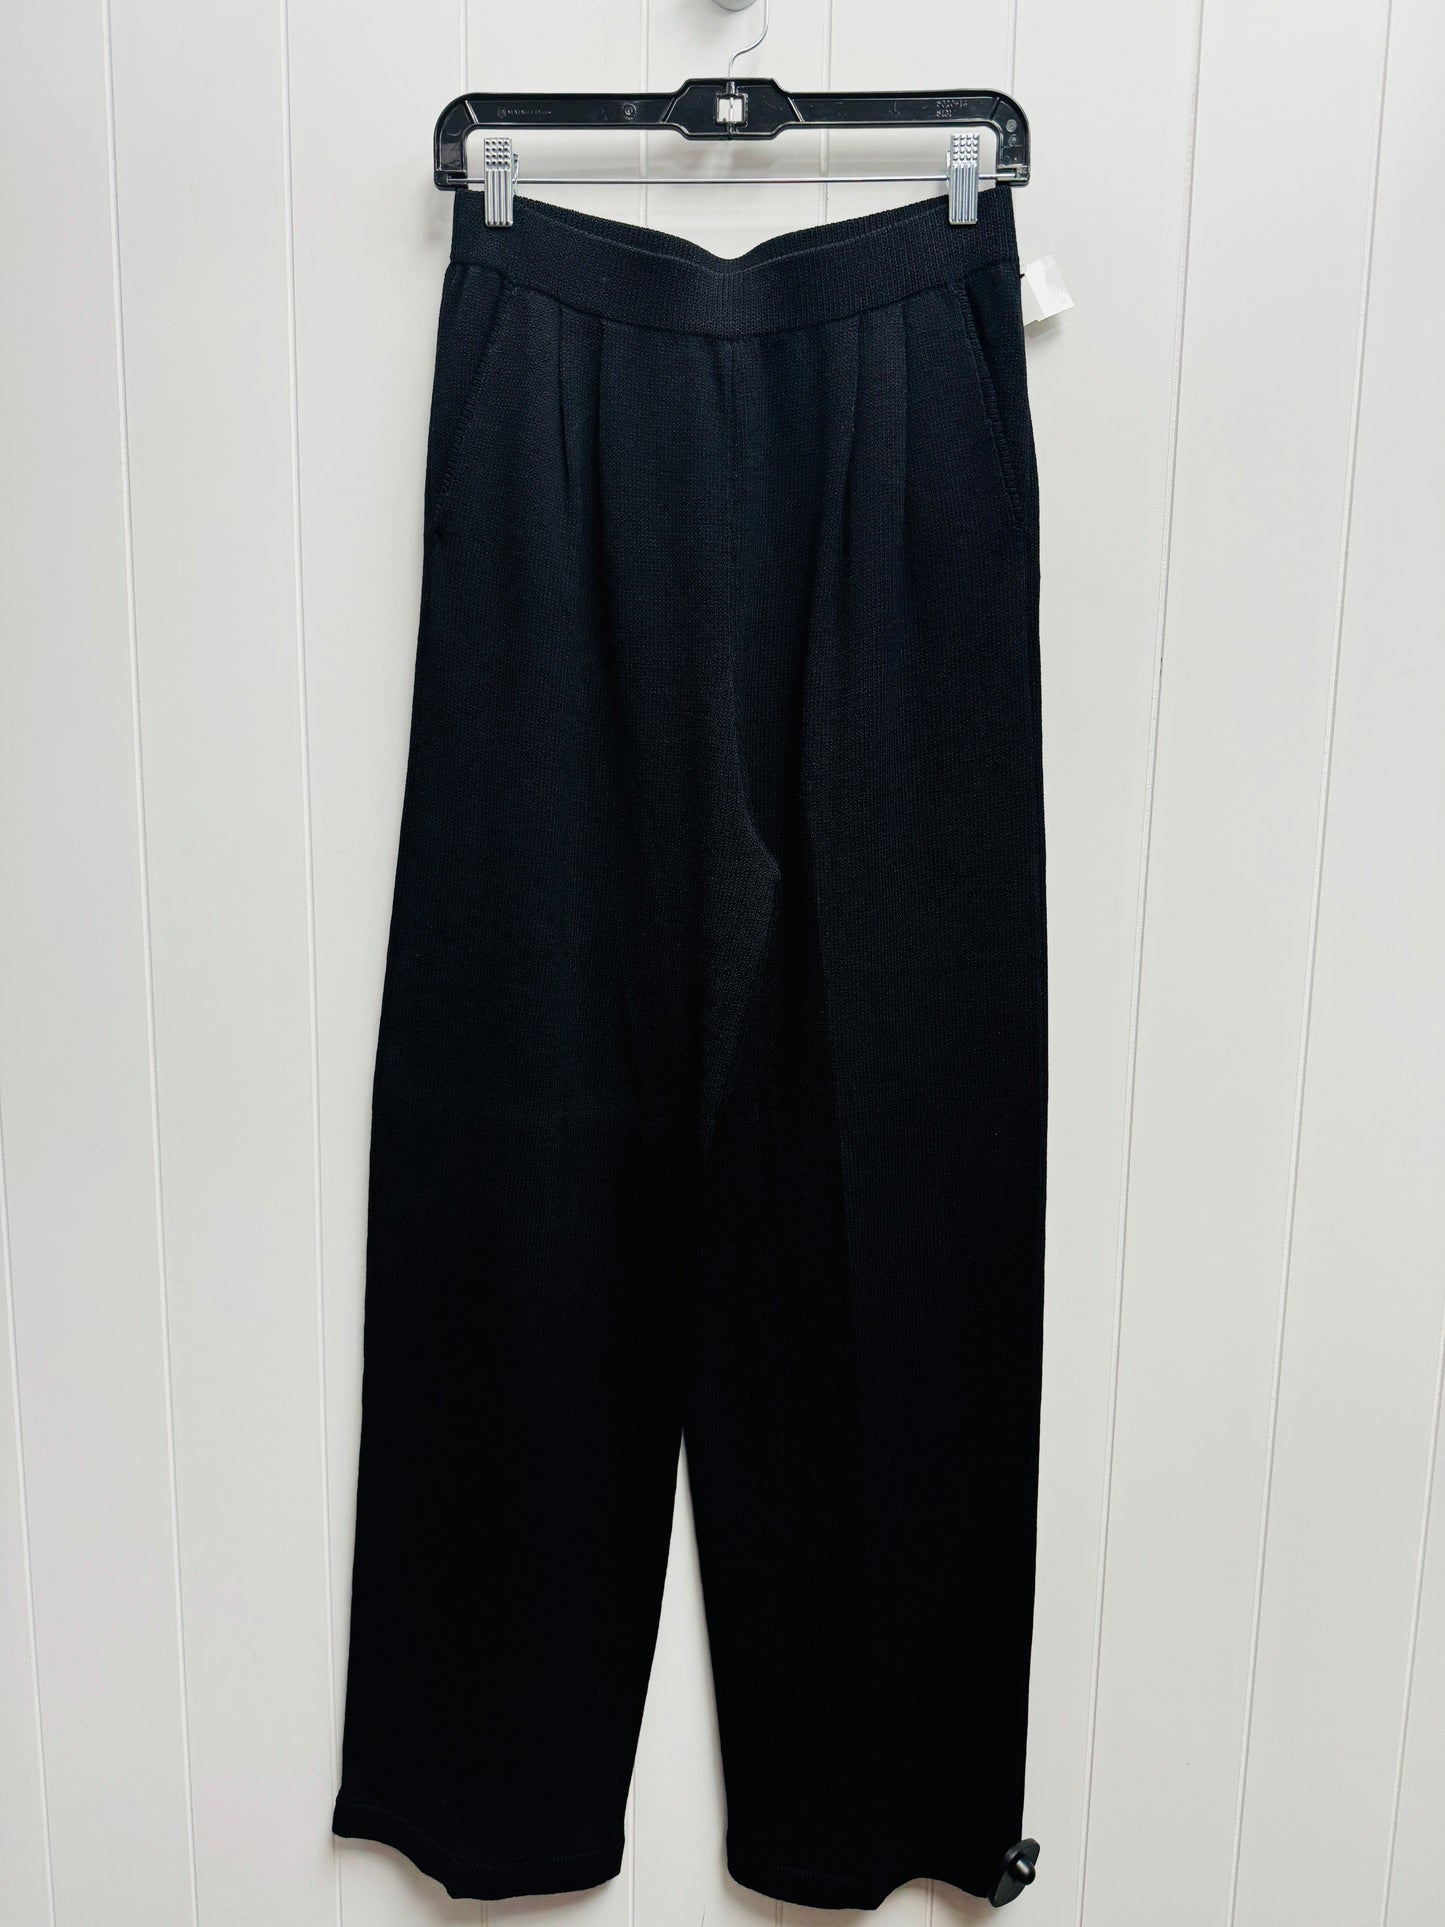 Black Pants Other St John Collection, Size 8